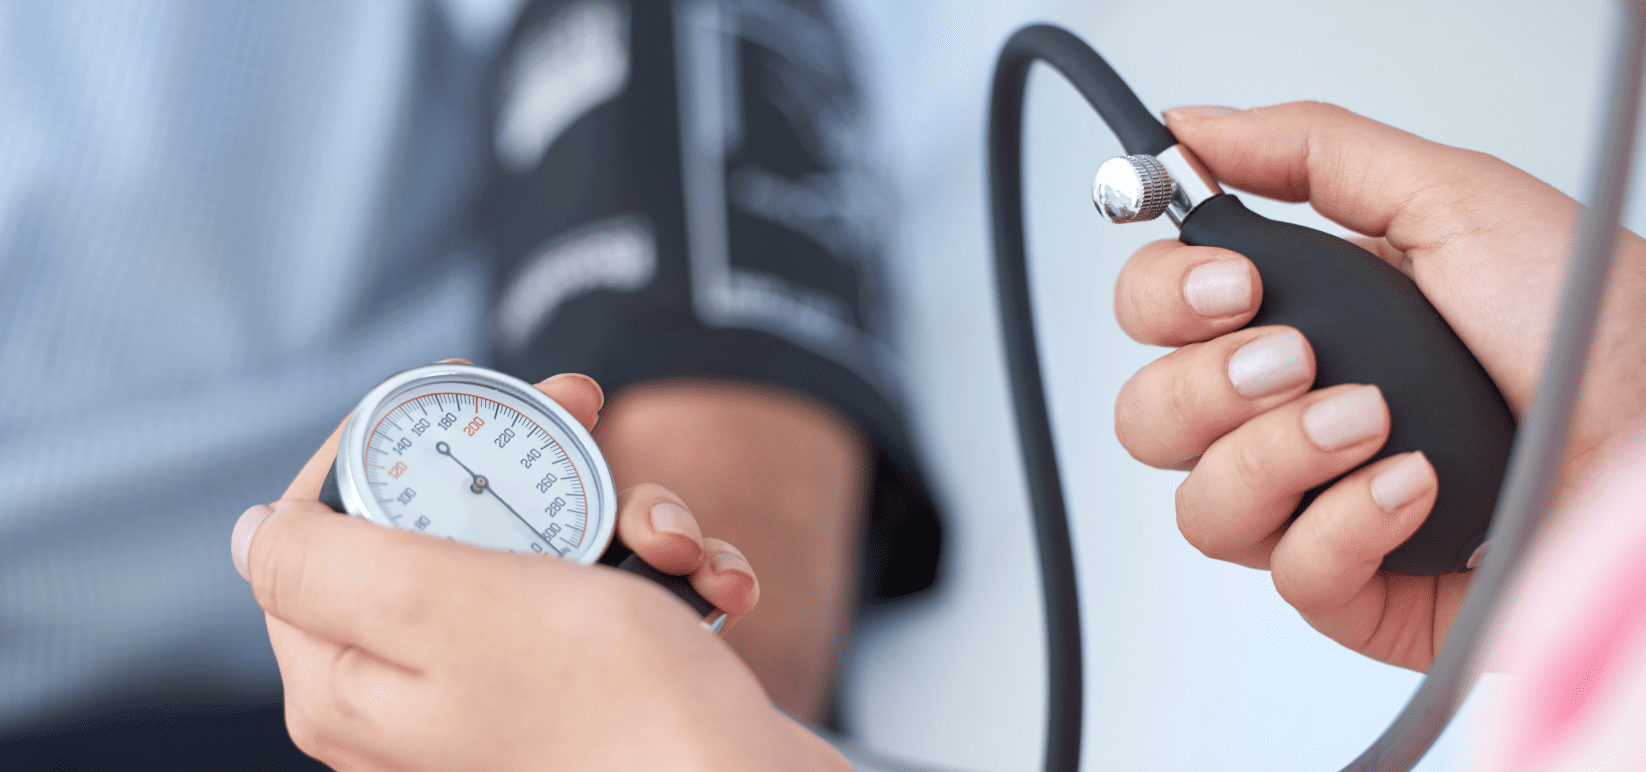 Patient having blood pressure checked by medical personnell with Sphygmomanometer 